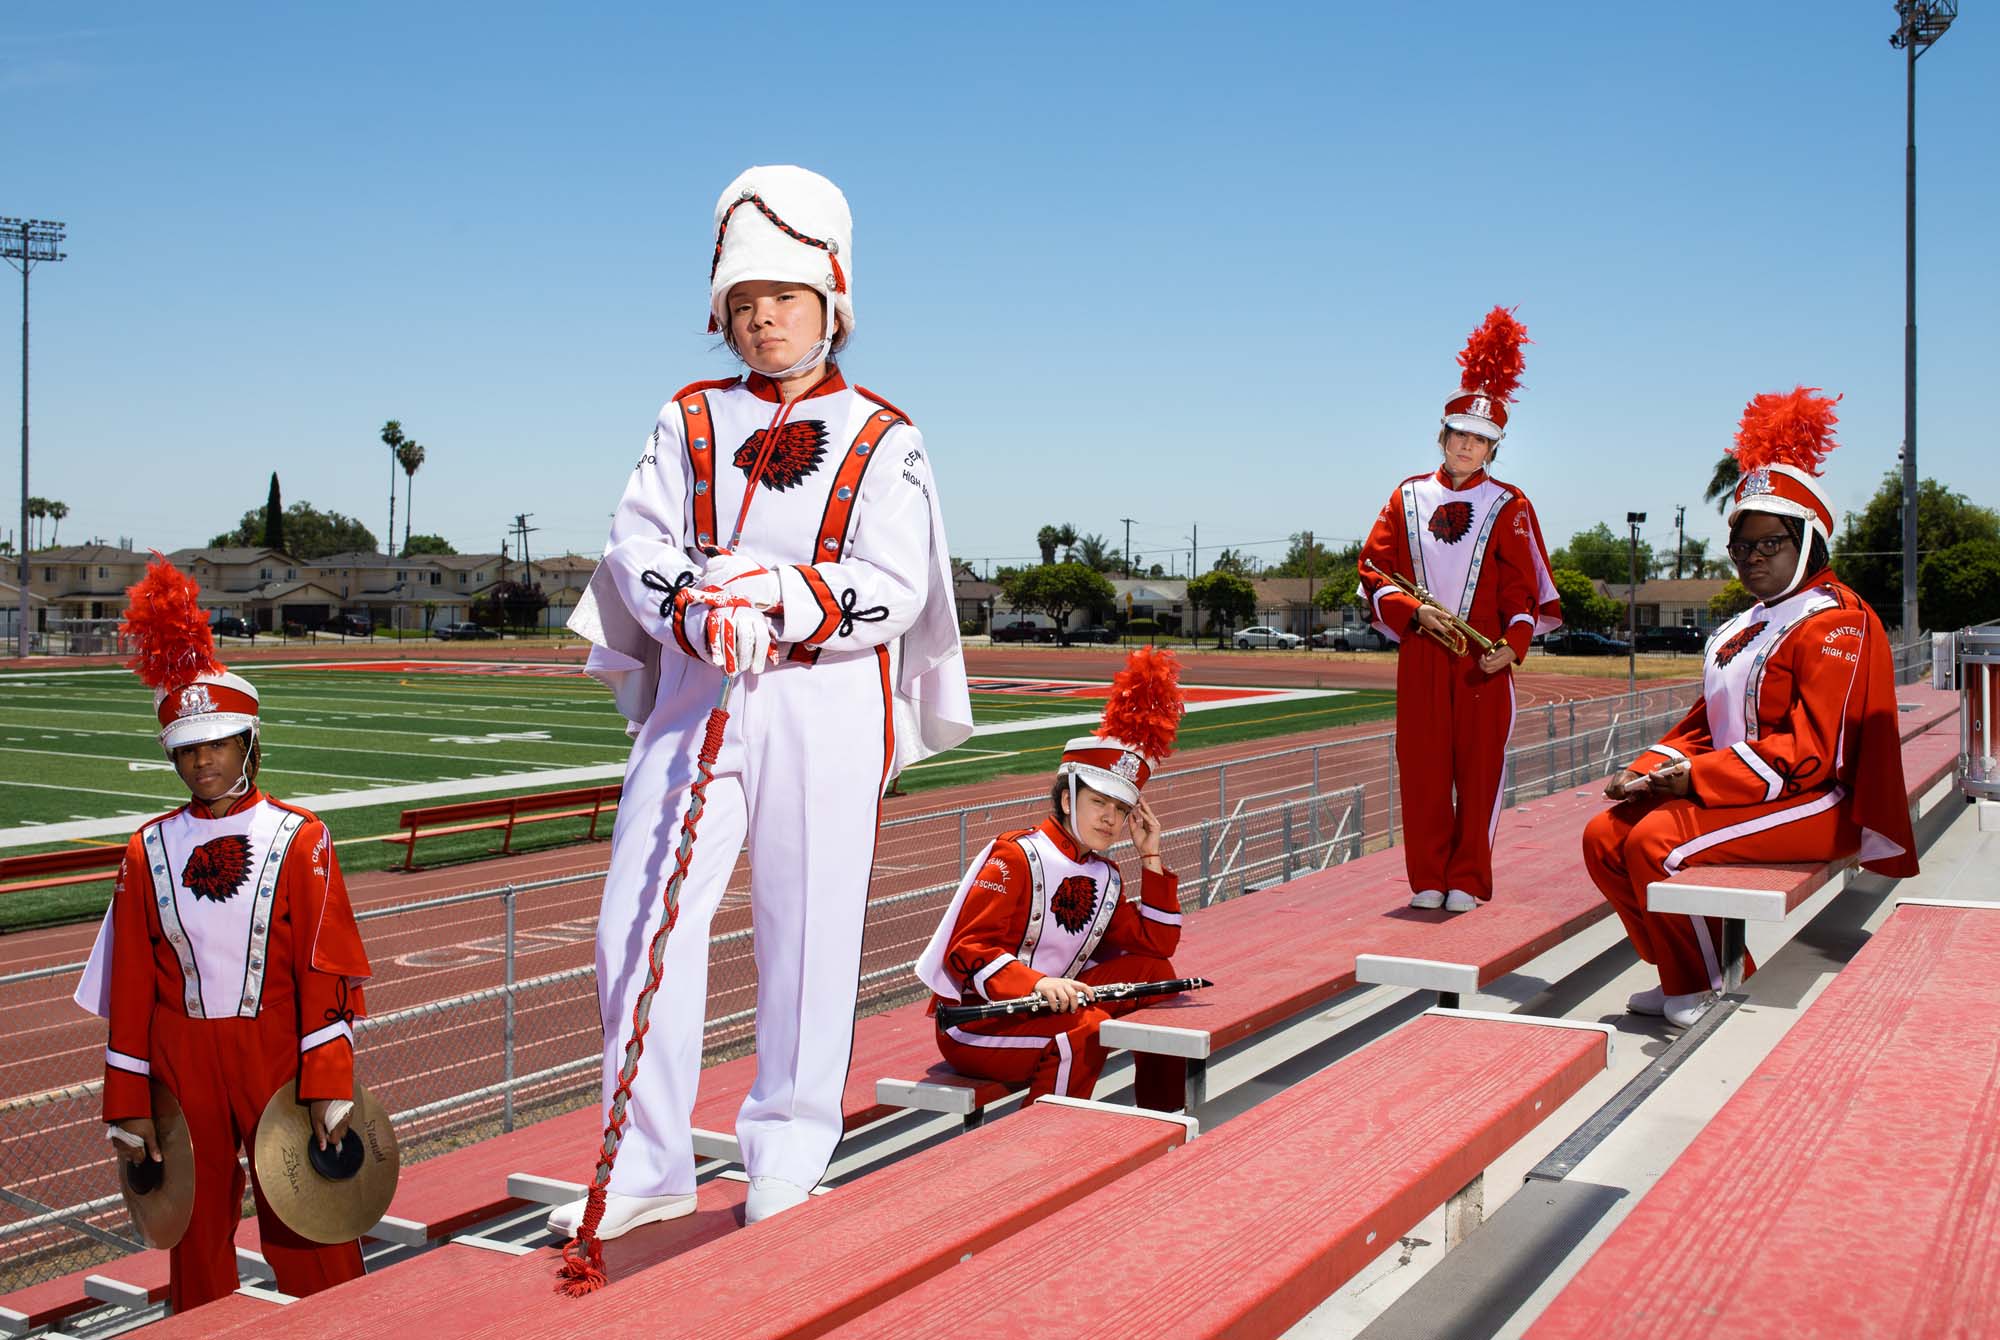 For Bianca Gonzalez (second from left), the drum major of Compton’s Centennial High School marching band, the disruptions caused by the pandemic have been devastating.